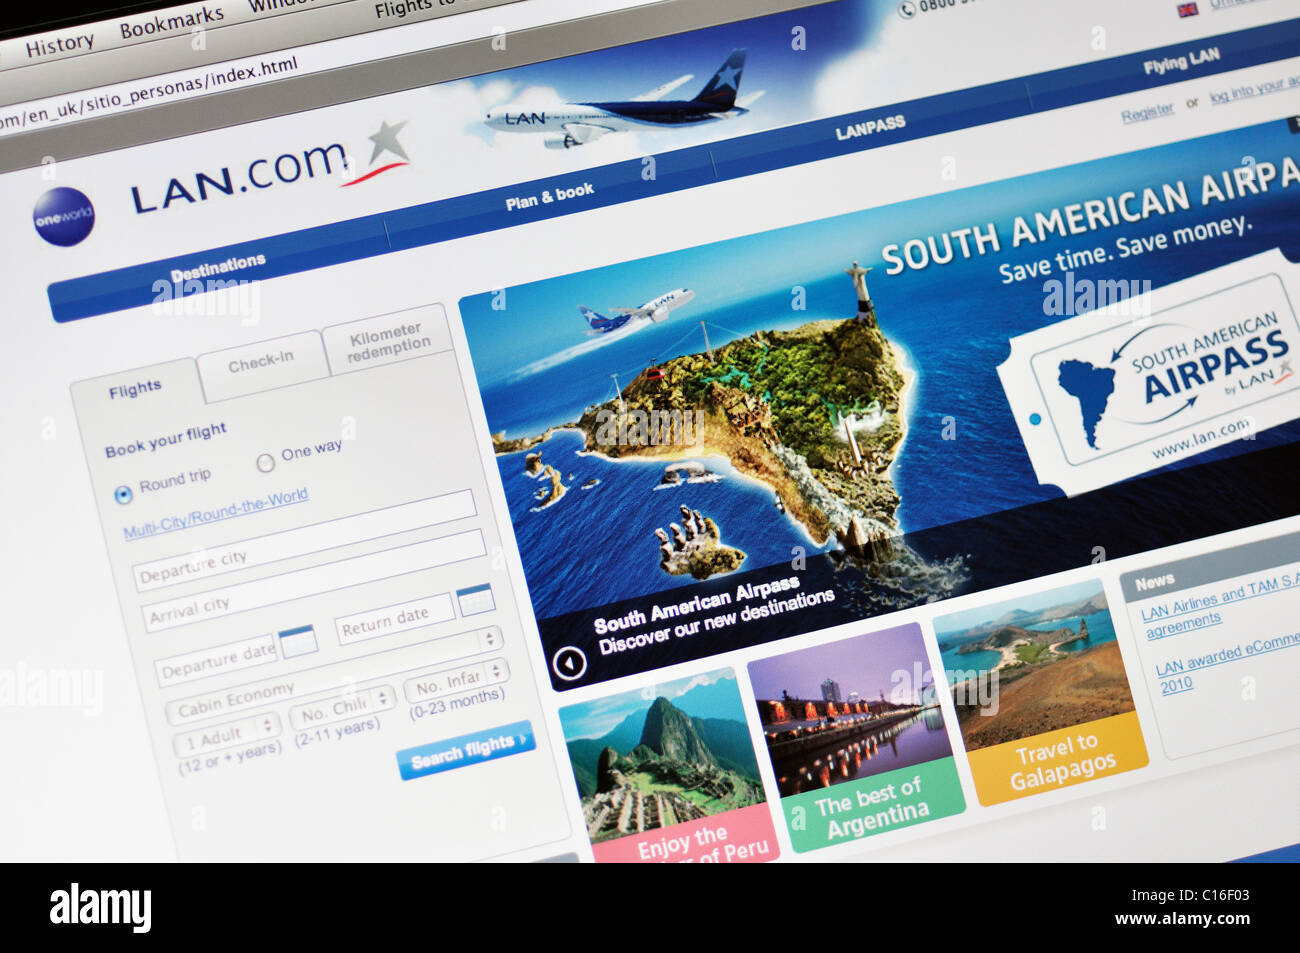 LAN Airlines website - South American Stock Photo